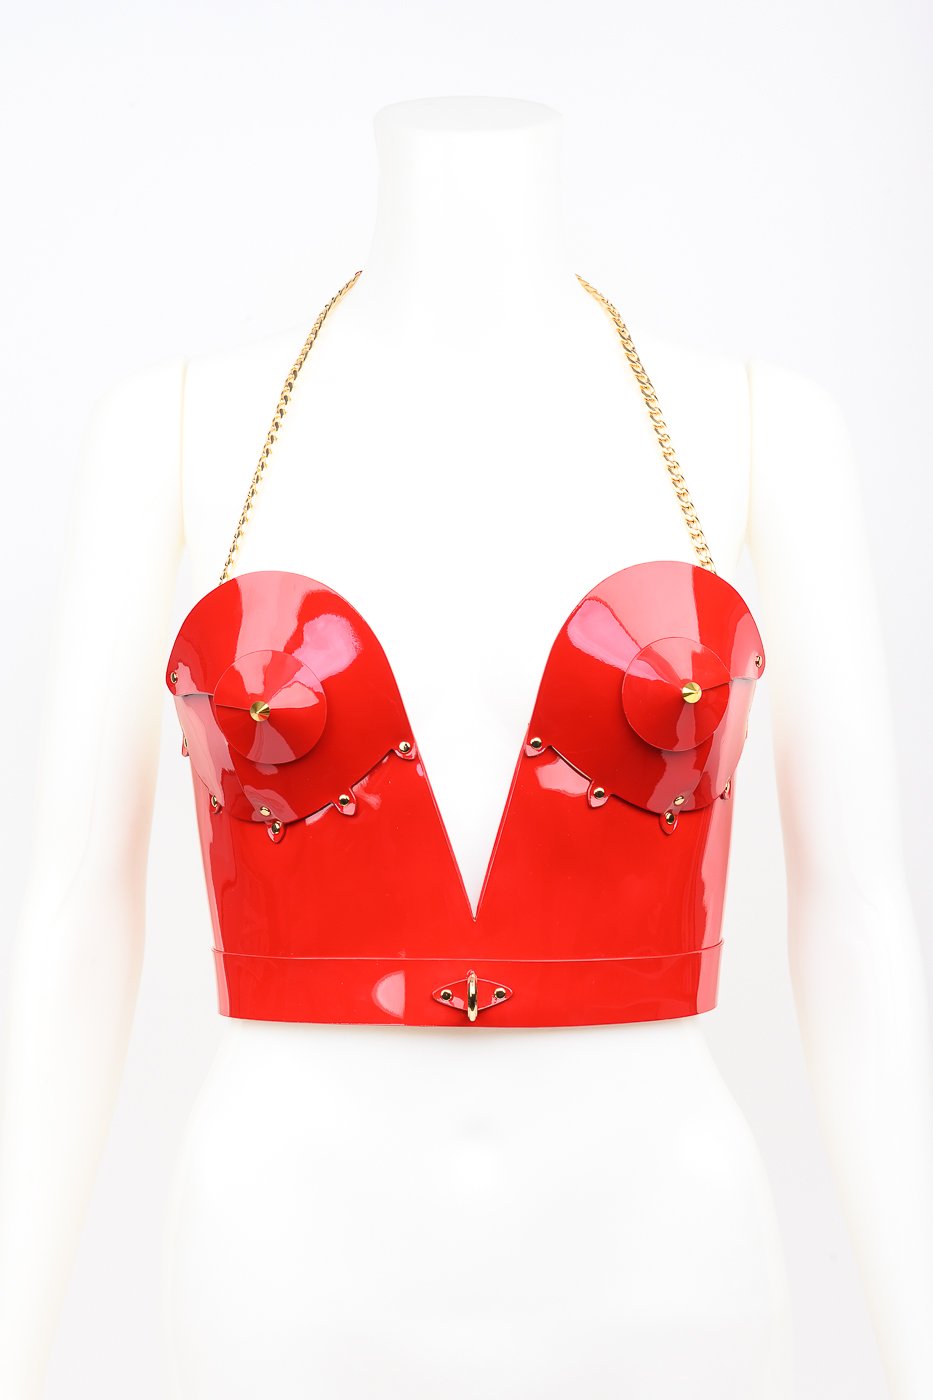 Roja Spiked Molded bustier in red patent leather by Fraulein Kink